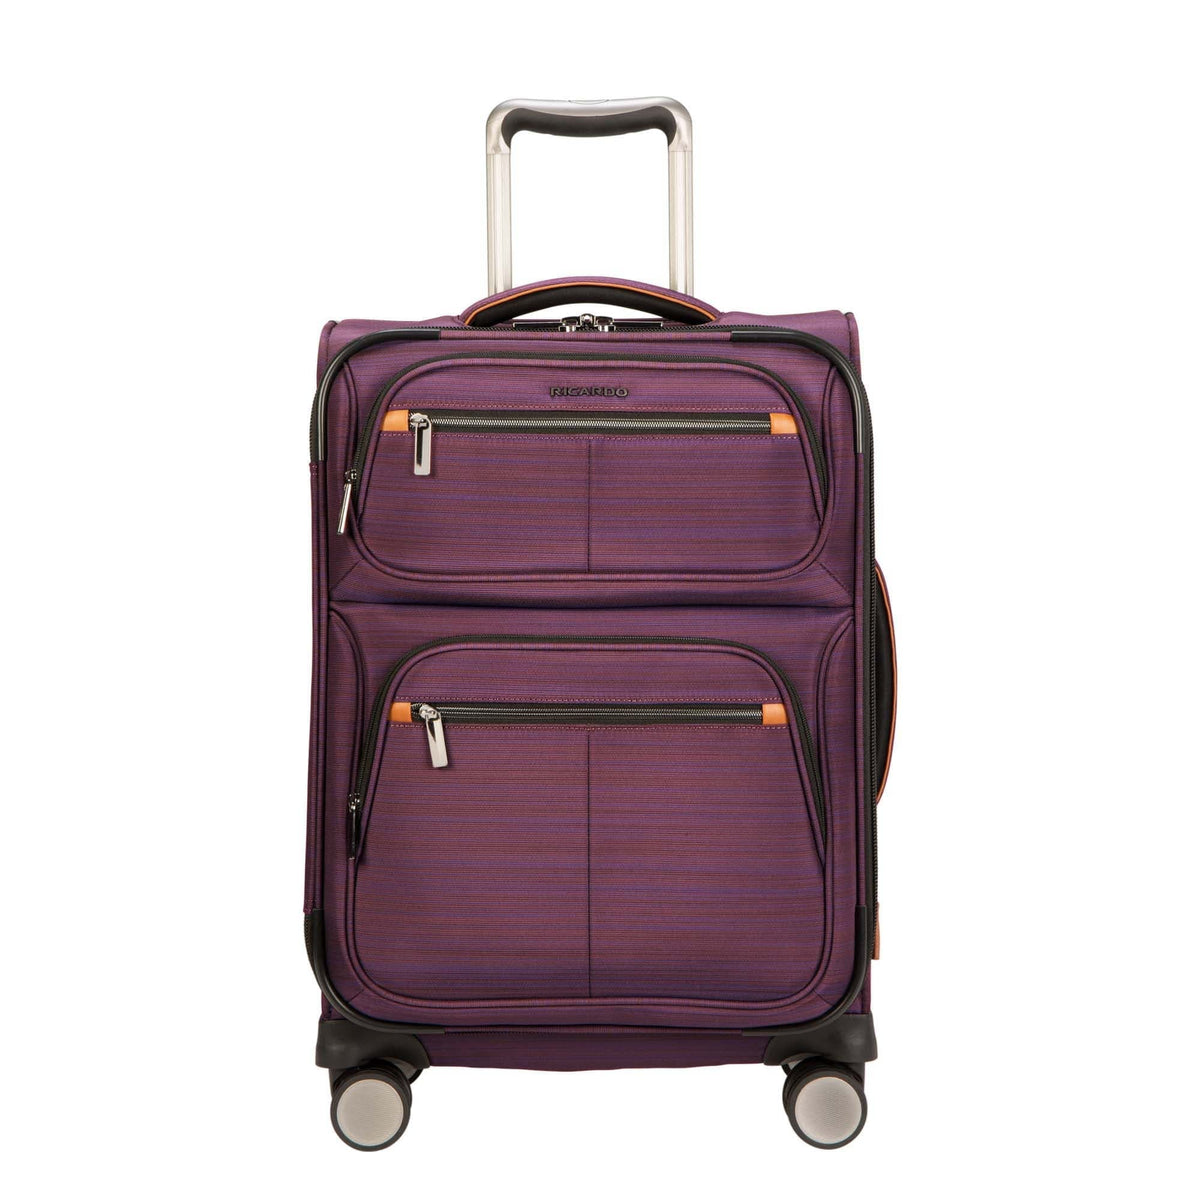 Ricardo Beverly Hills Montecito Softside Carry-On Luggage